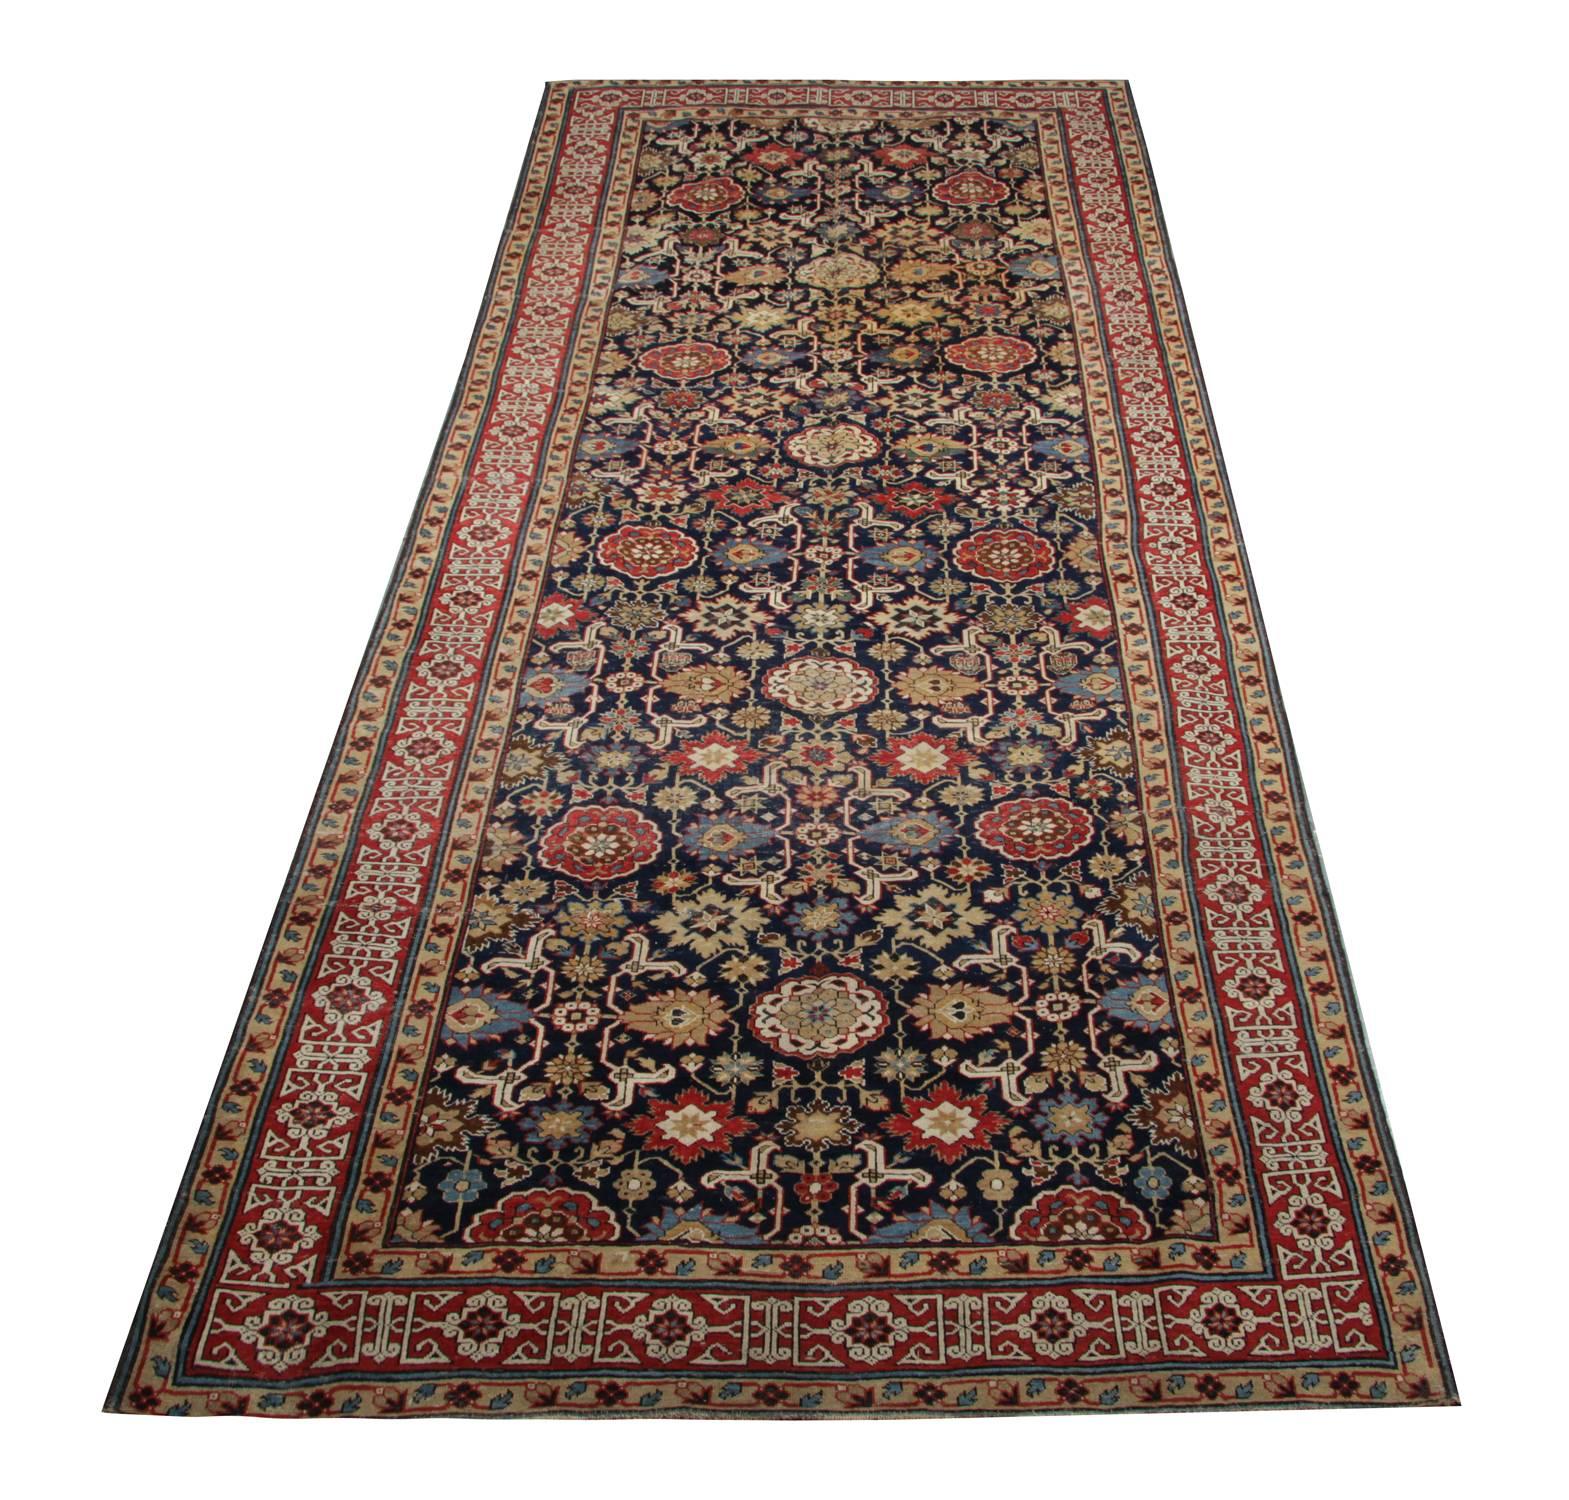 Oriental rug an exceptional example of Kuba all-over patterned rugs. This geometric antique rug is in excellent condition, circa 1870s. These large rugs are from Kuba, which is a part of the Caucasian area. This floral rug has a lot of contrasting